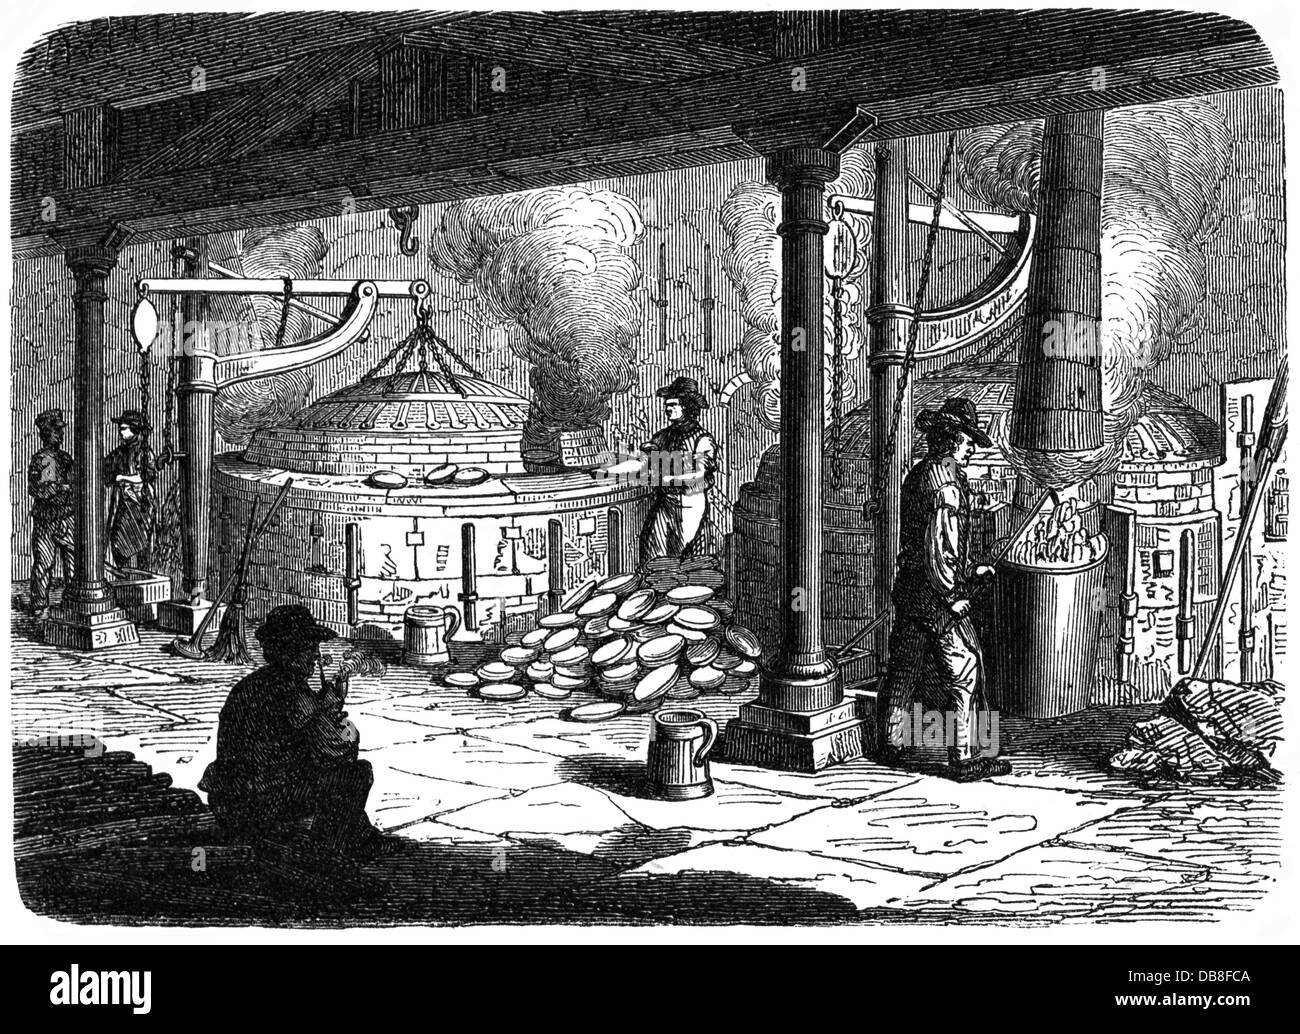 metal, lead, refining furnace, wood engraving, out of: book of inventions, trades and industries, Otto Spamer publishing house, 6th edition, Leipzig - Berlin, 1872, Additional-Rights-Clearences-Not Available Stock Photo